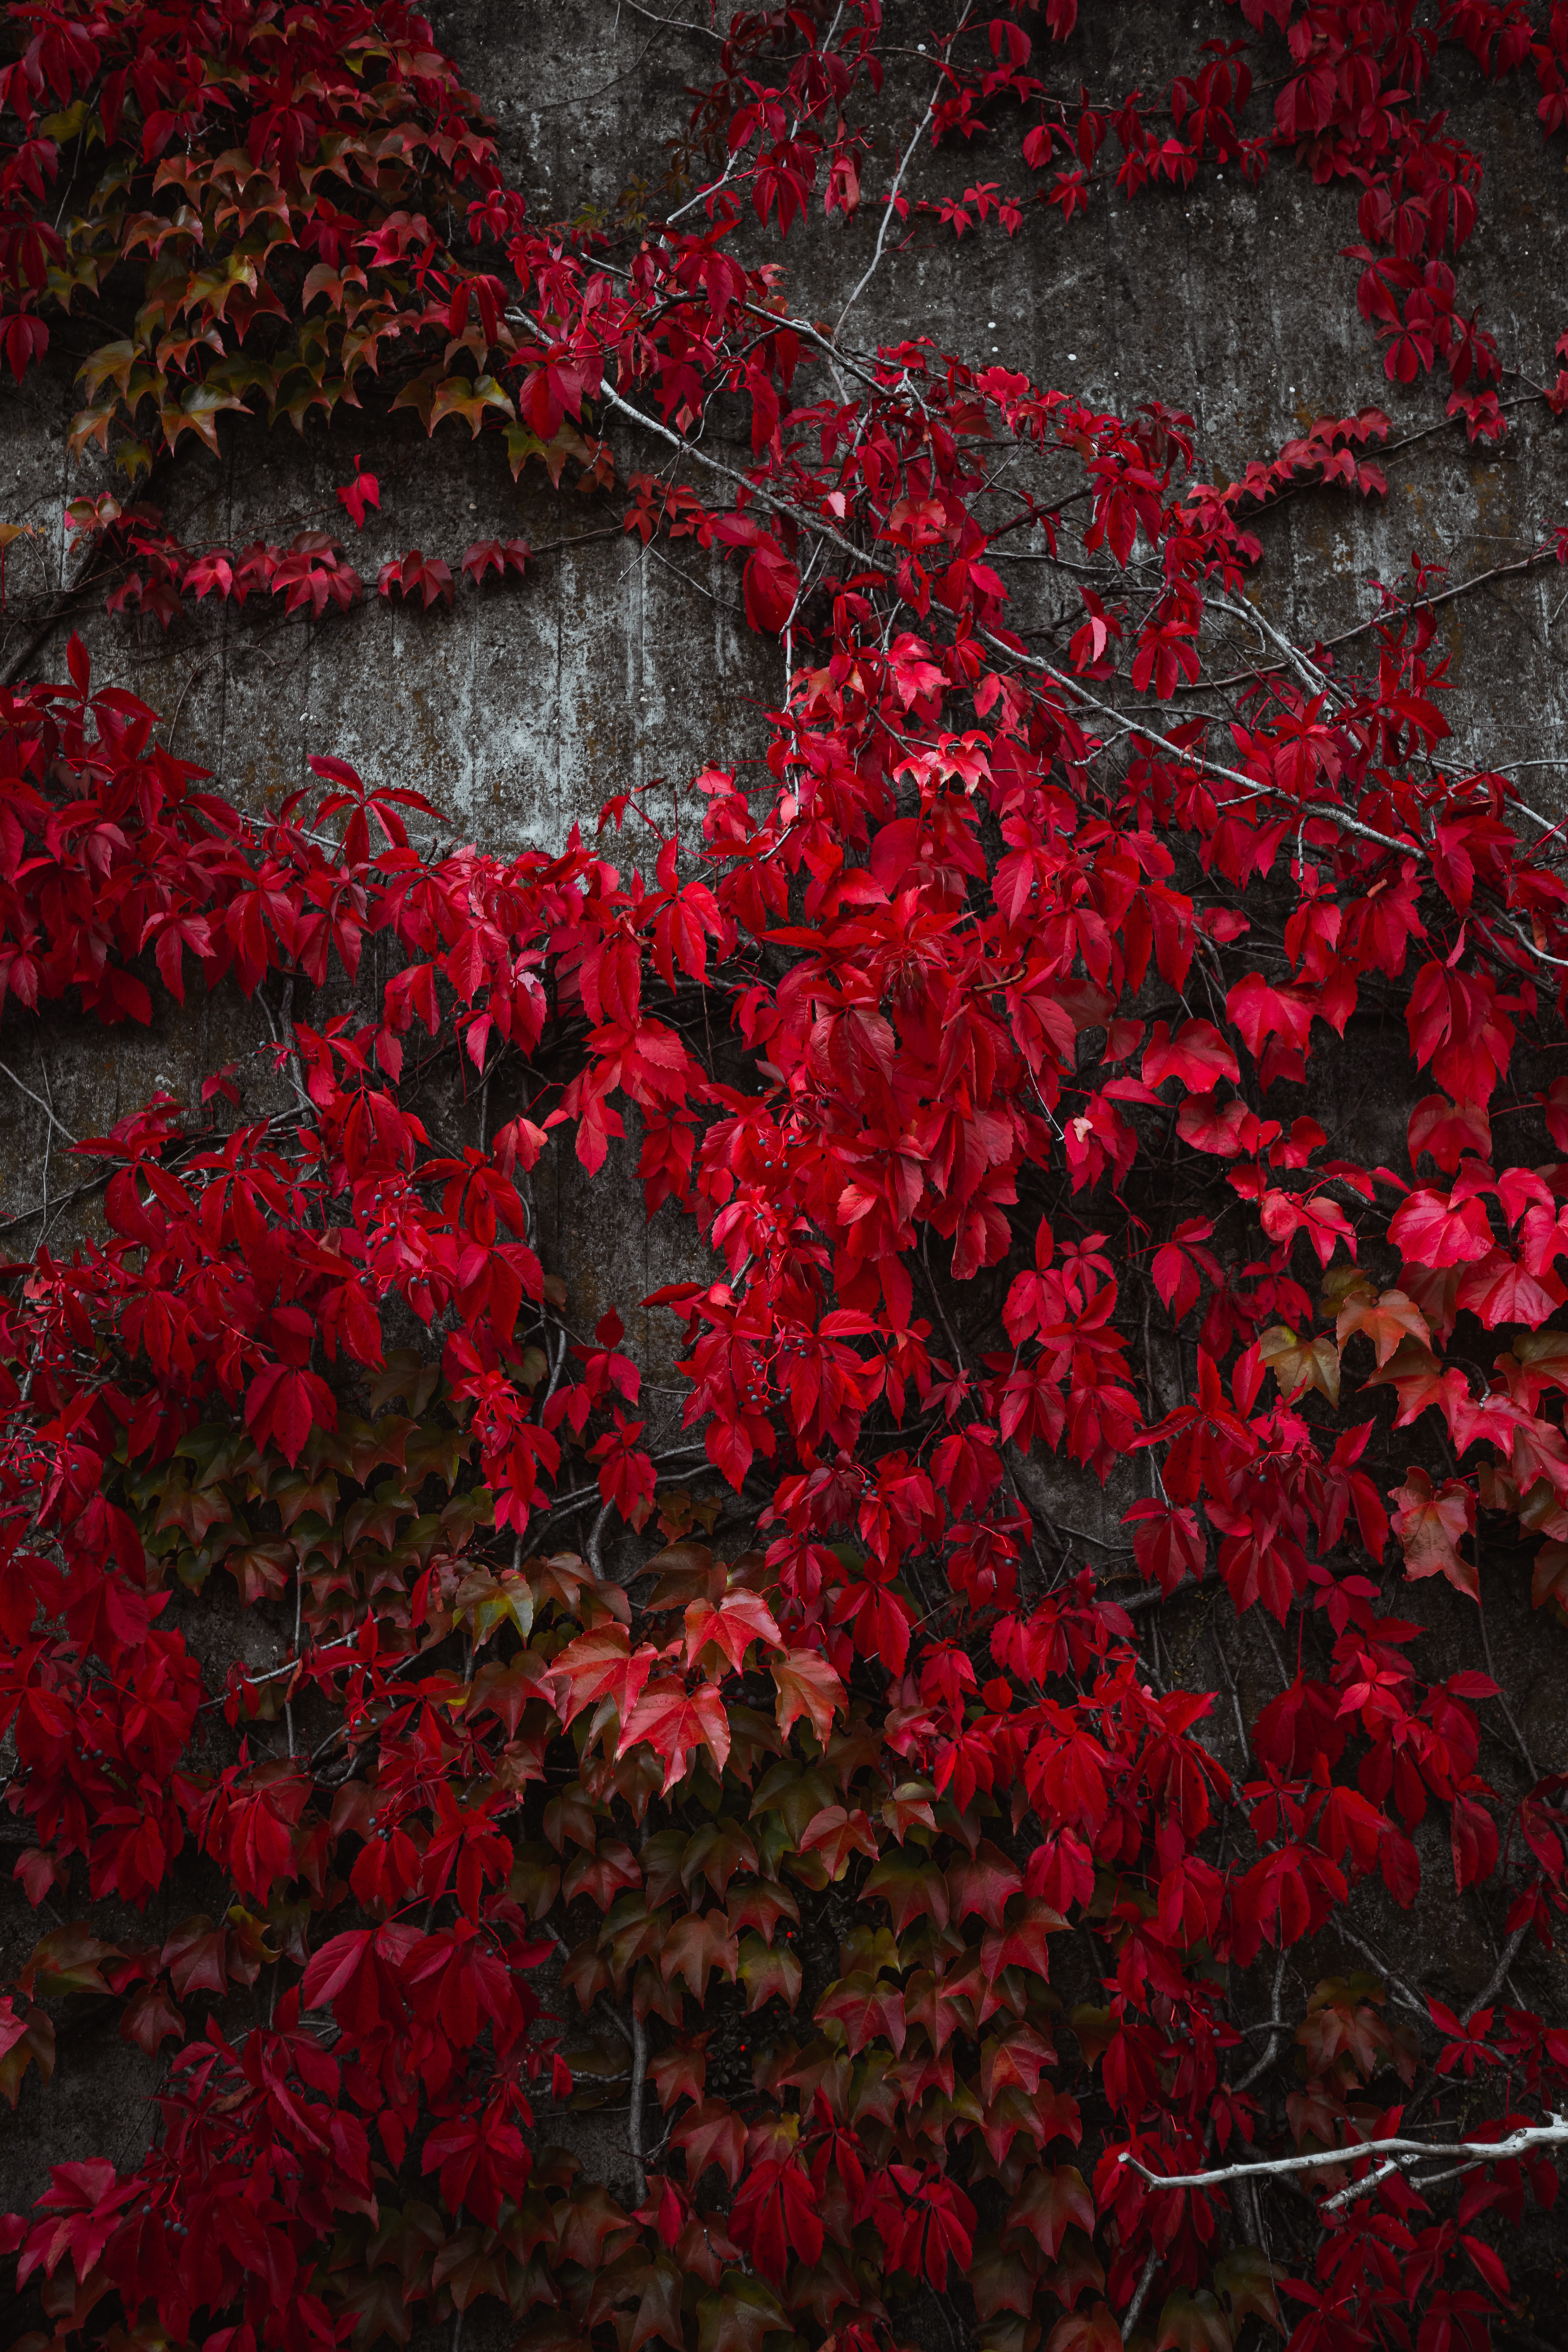 New Lock Screen Wallpapers nature, autumn, leaves, red, plant, ivy